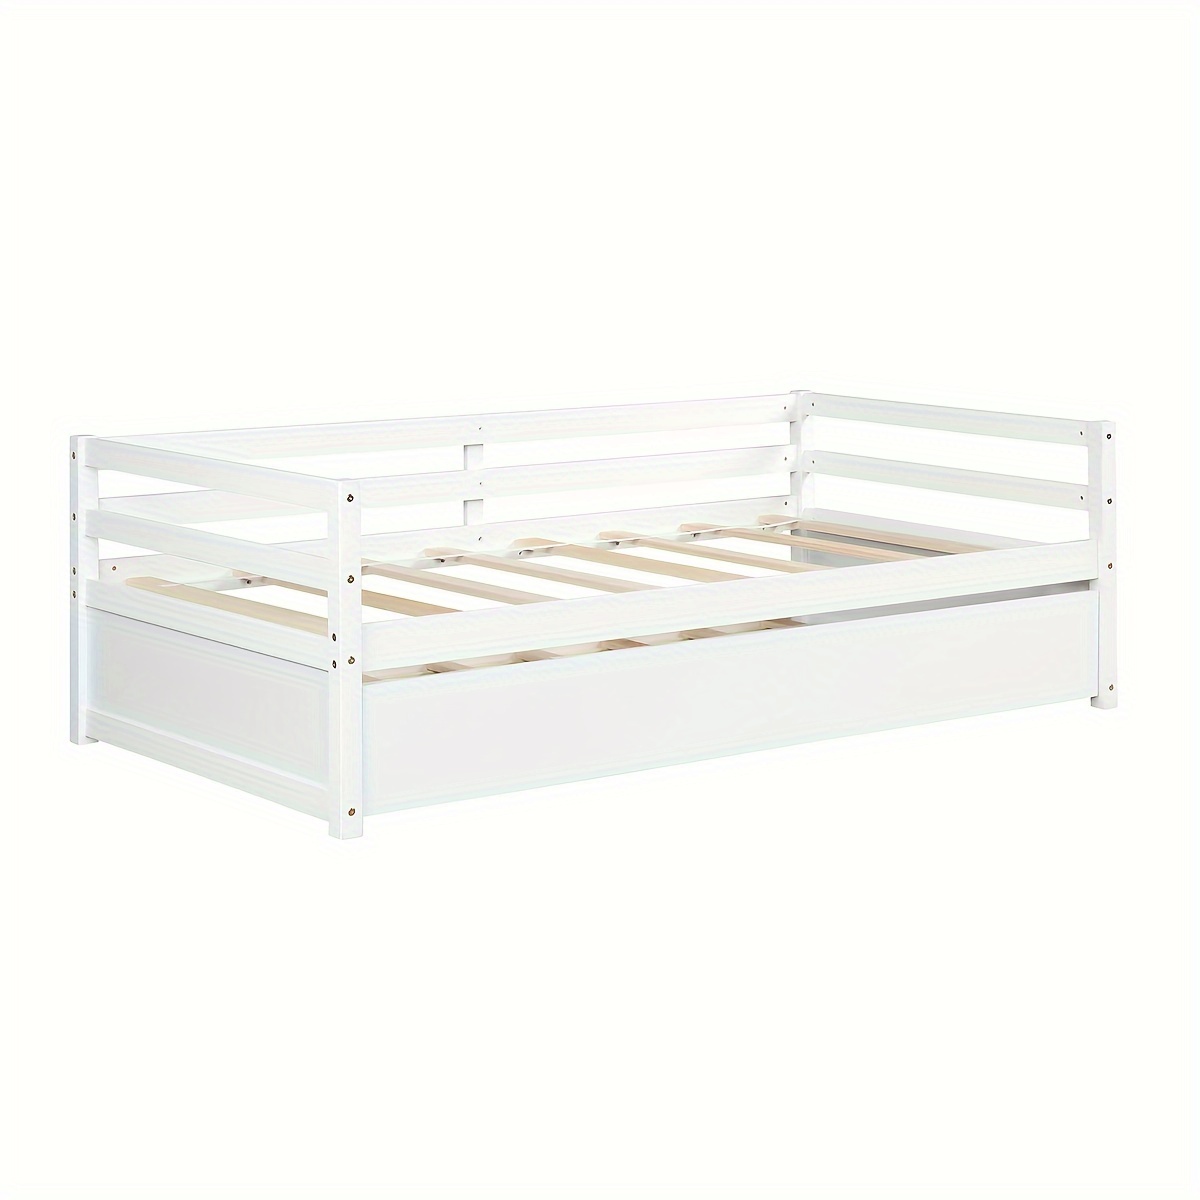 

Twin Size Trundle Daybed Wooden Slat Support Mattress Platform For Kids White